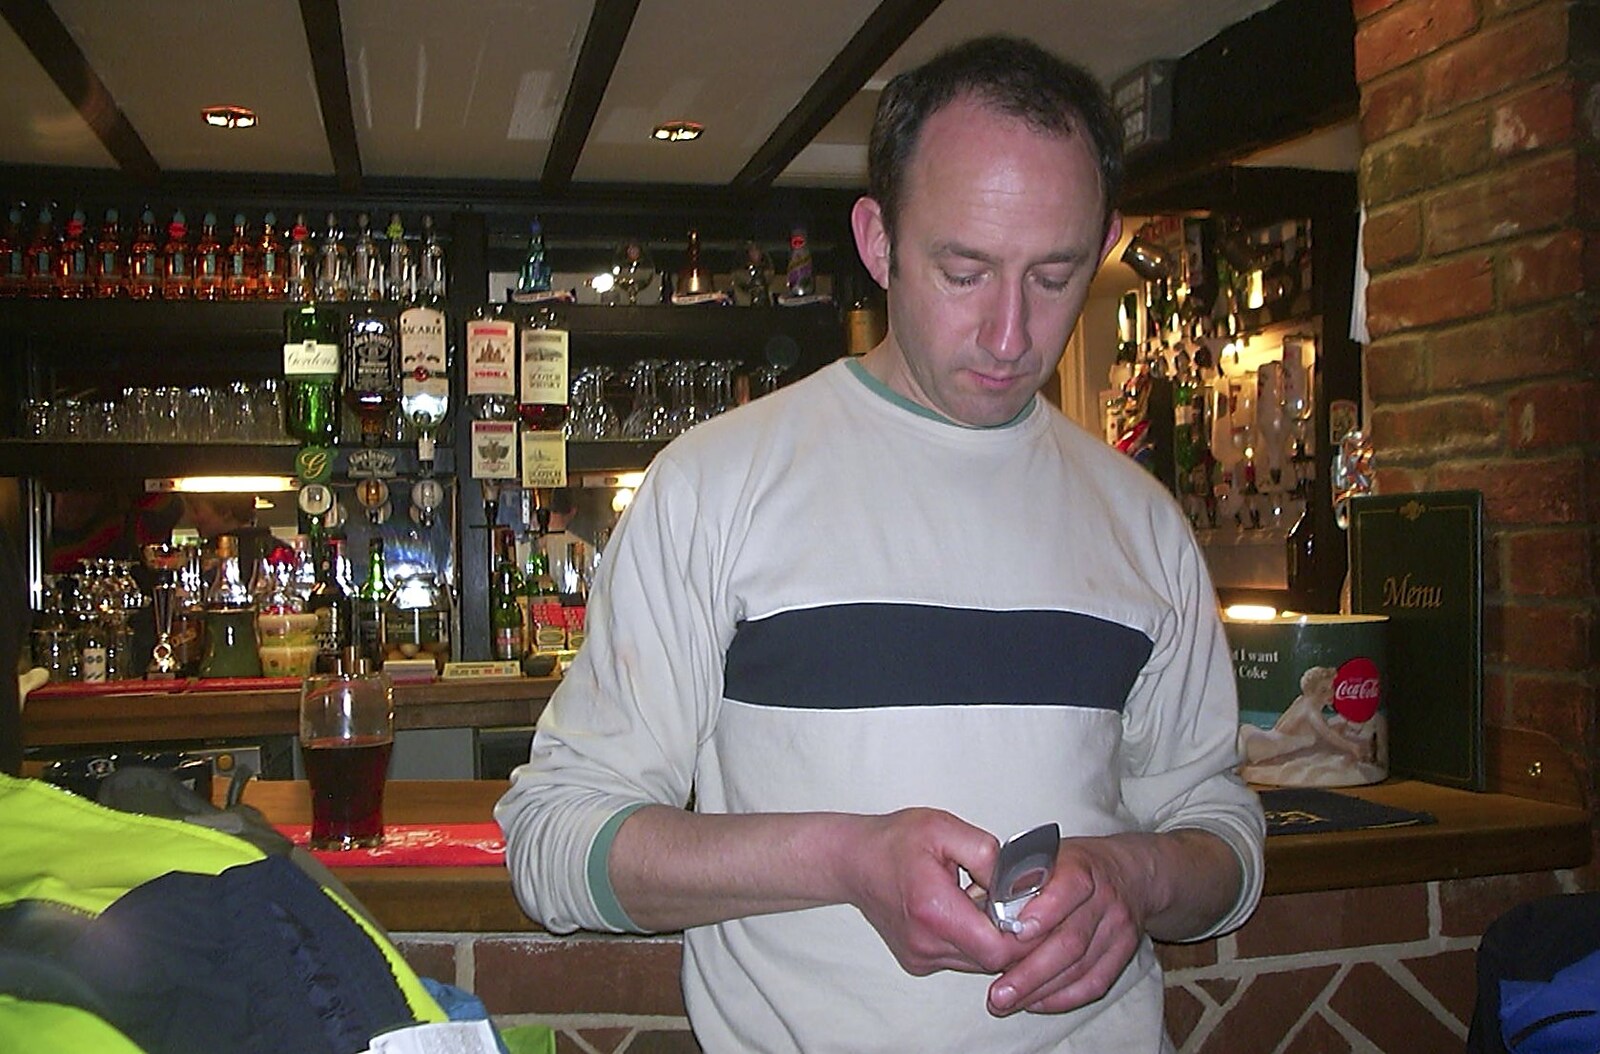 The BSCC Easter Bike Ride, Thelnetham and Redgrave, Suffolk - 10th April 2004: DH checks his phone